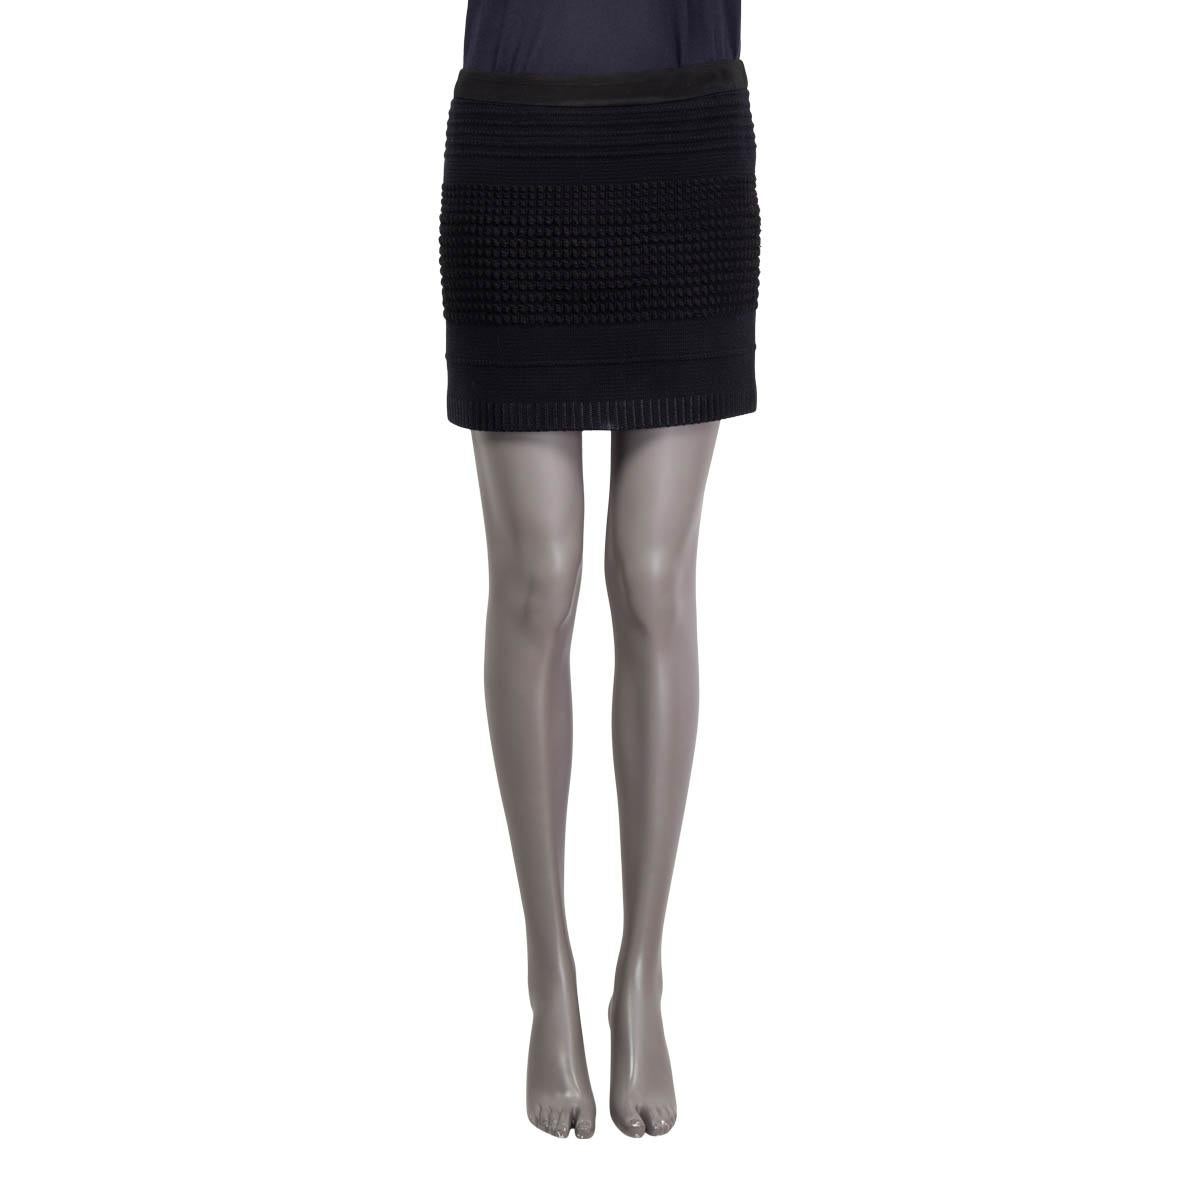 100% authentic Stella McCartney woven mini skirt in black cotton (51%), silk (24%), polyester (20%) and viscose (5%). Opens with a concealed zipper and a hook at the back. Lined in black. Has been worn and is in excellent